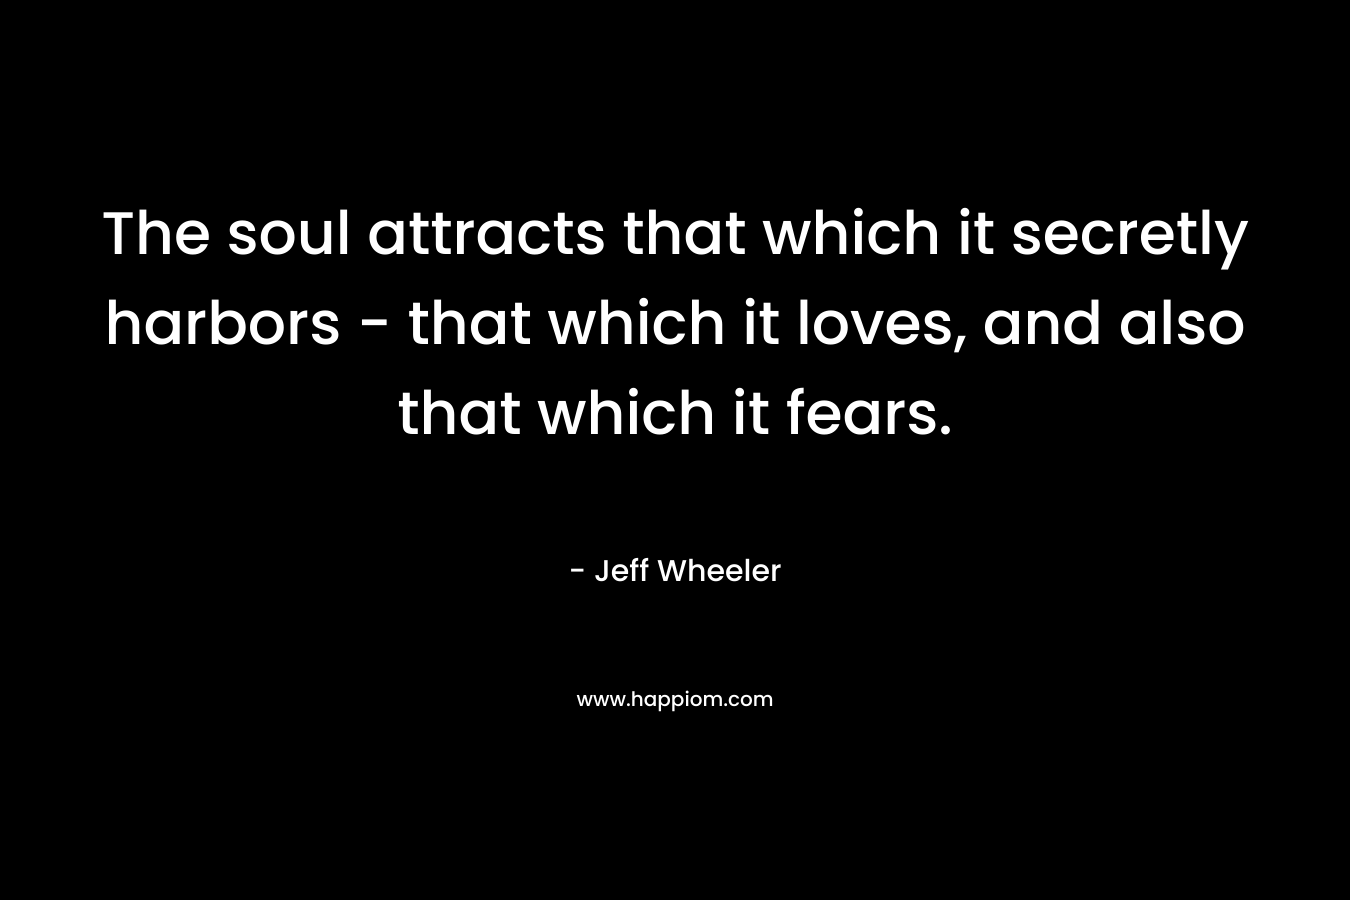 The soul attracts that which it secretly harbors – that which it loves, and also that which it fears. – Jeff Wheeler